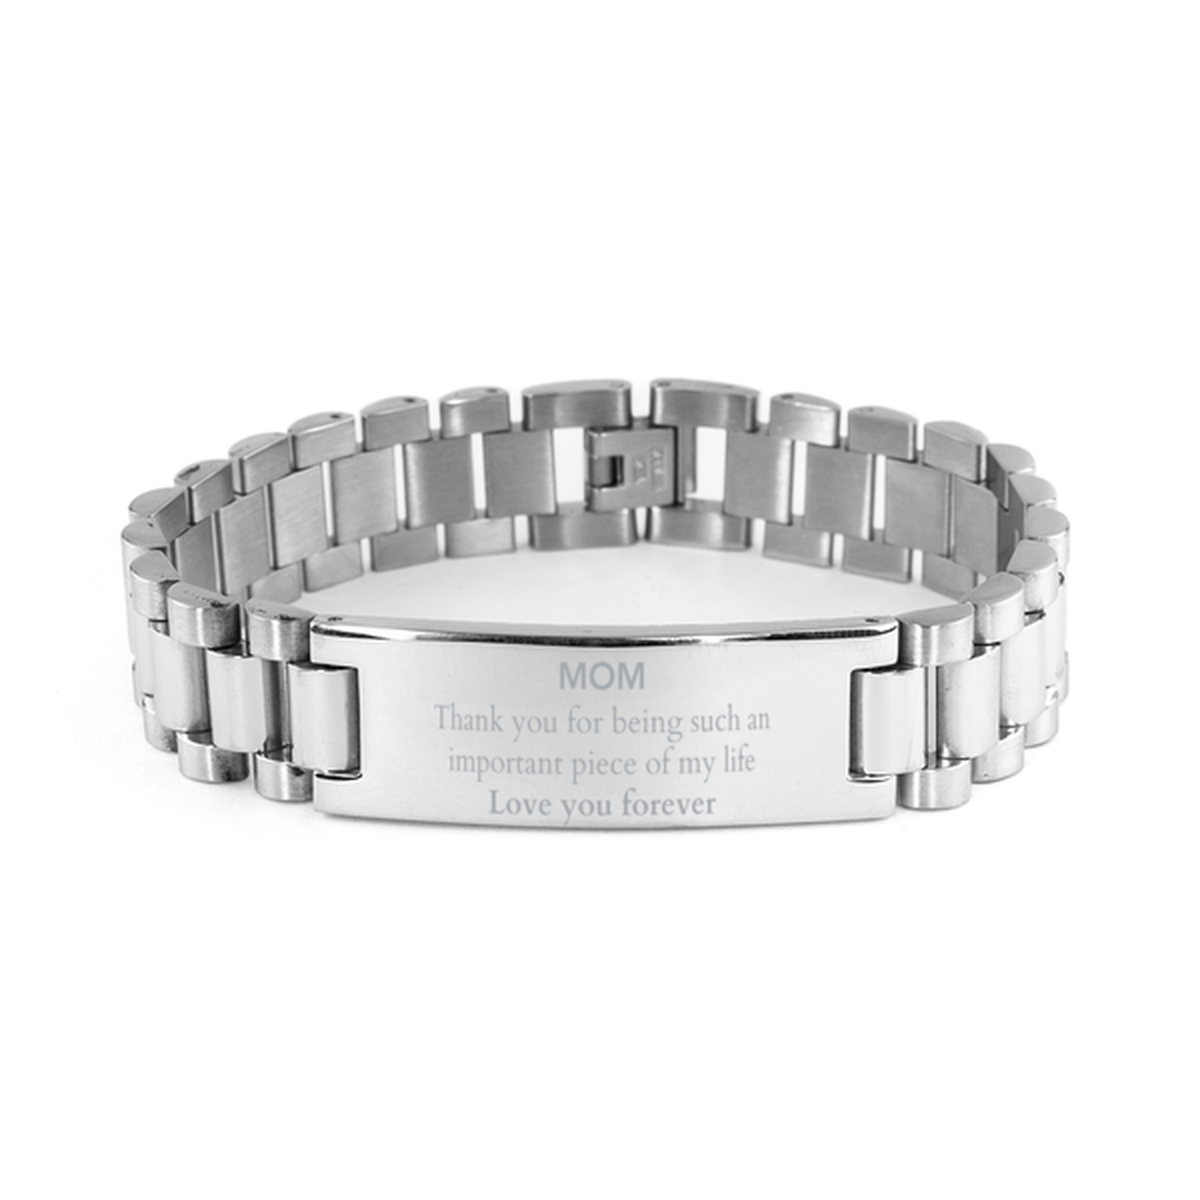 Appropriate Mom Ladder Stainless Steel Bracelet Epic Birthday Gifts for Mom Thank you for being such an important piece of my life Mom Christmas Mothers Fathers Day